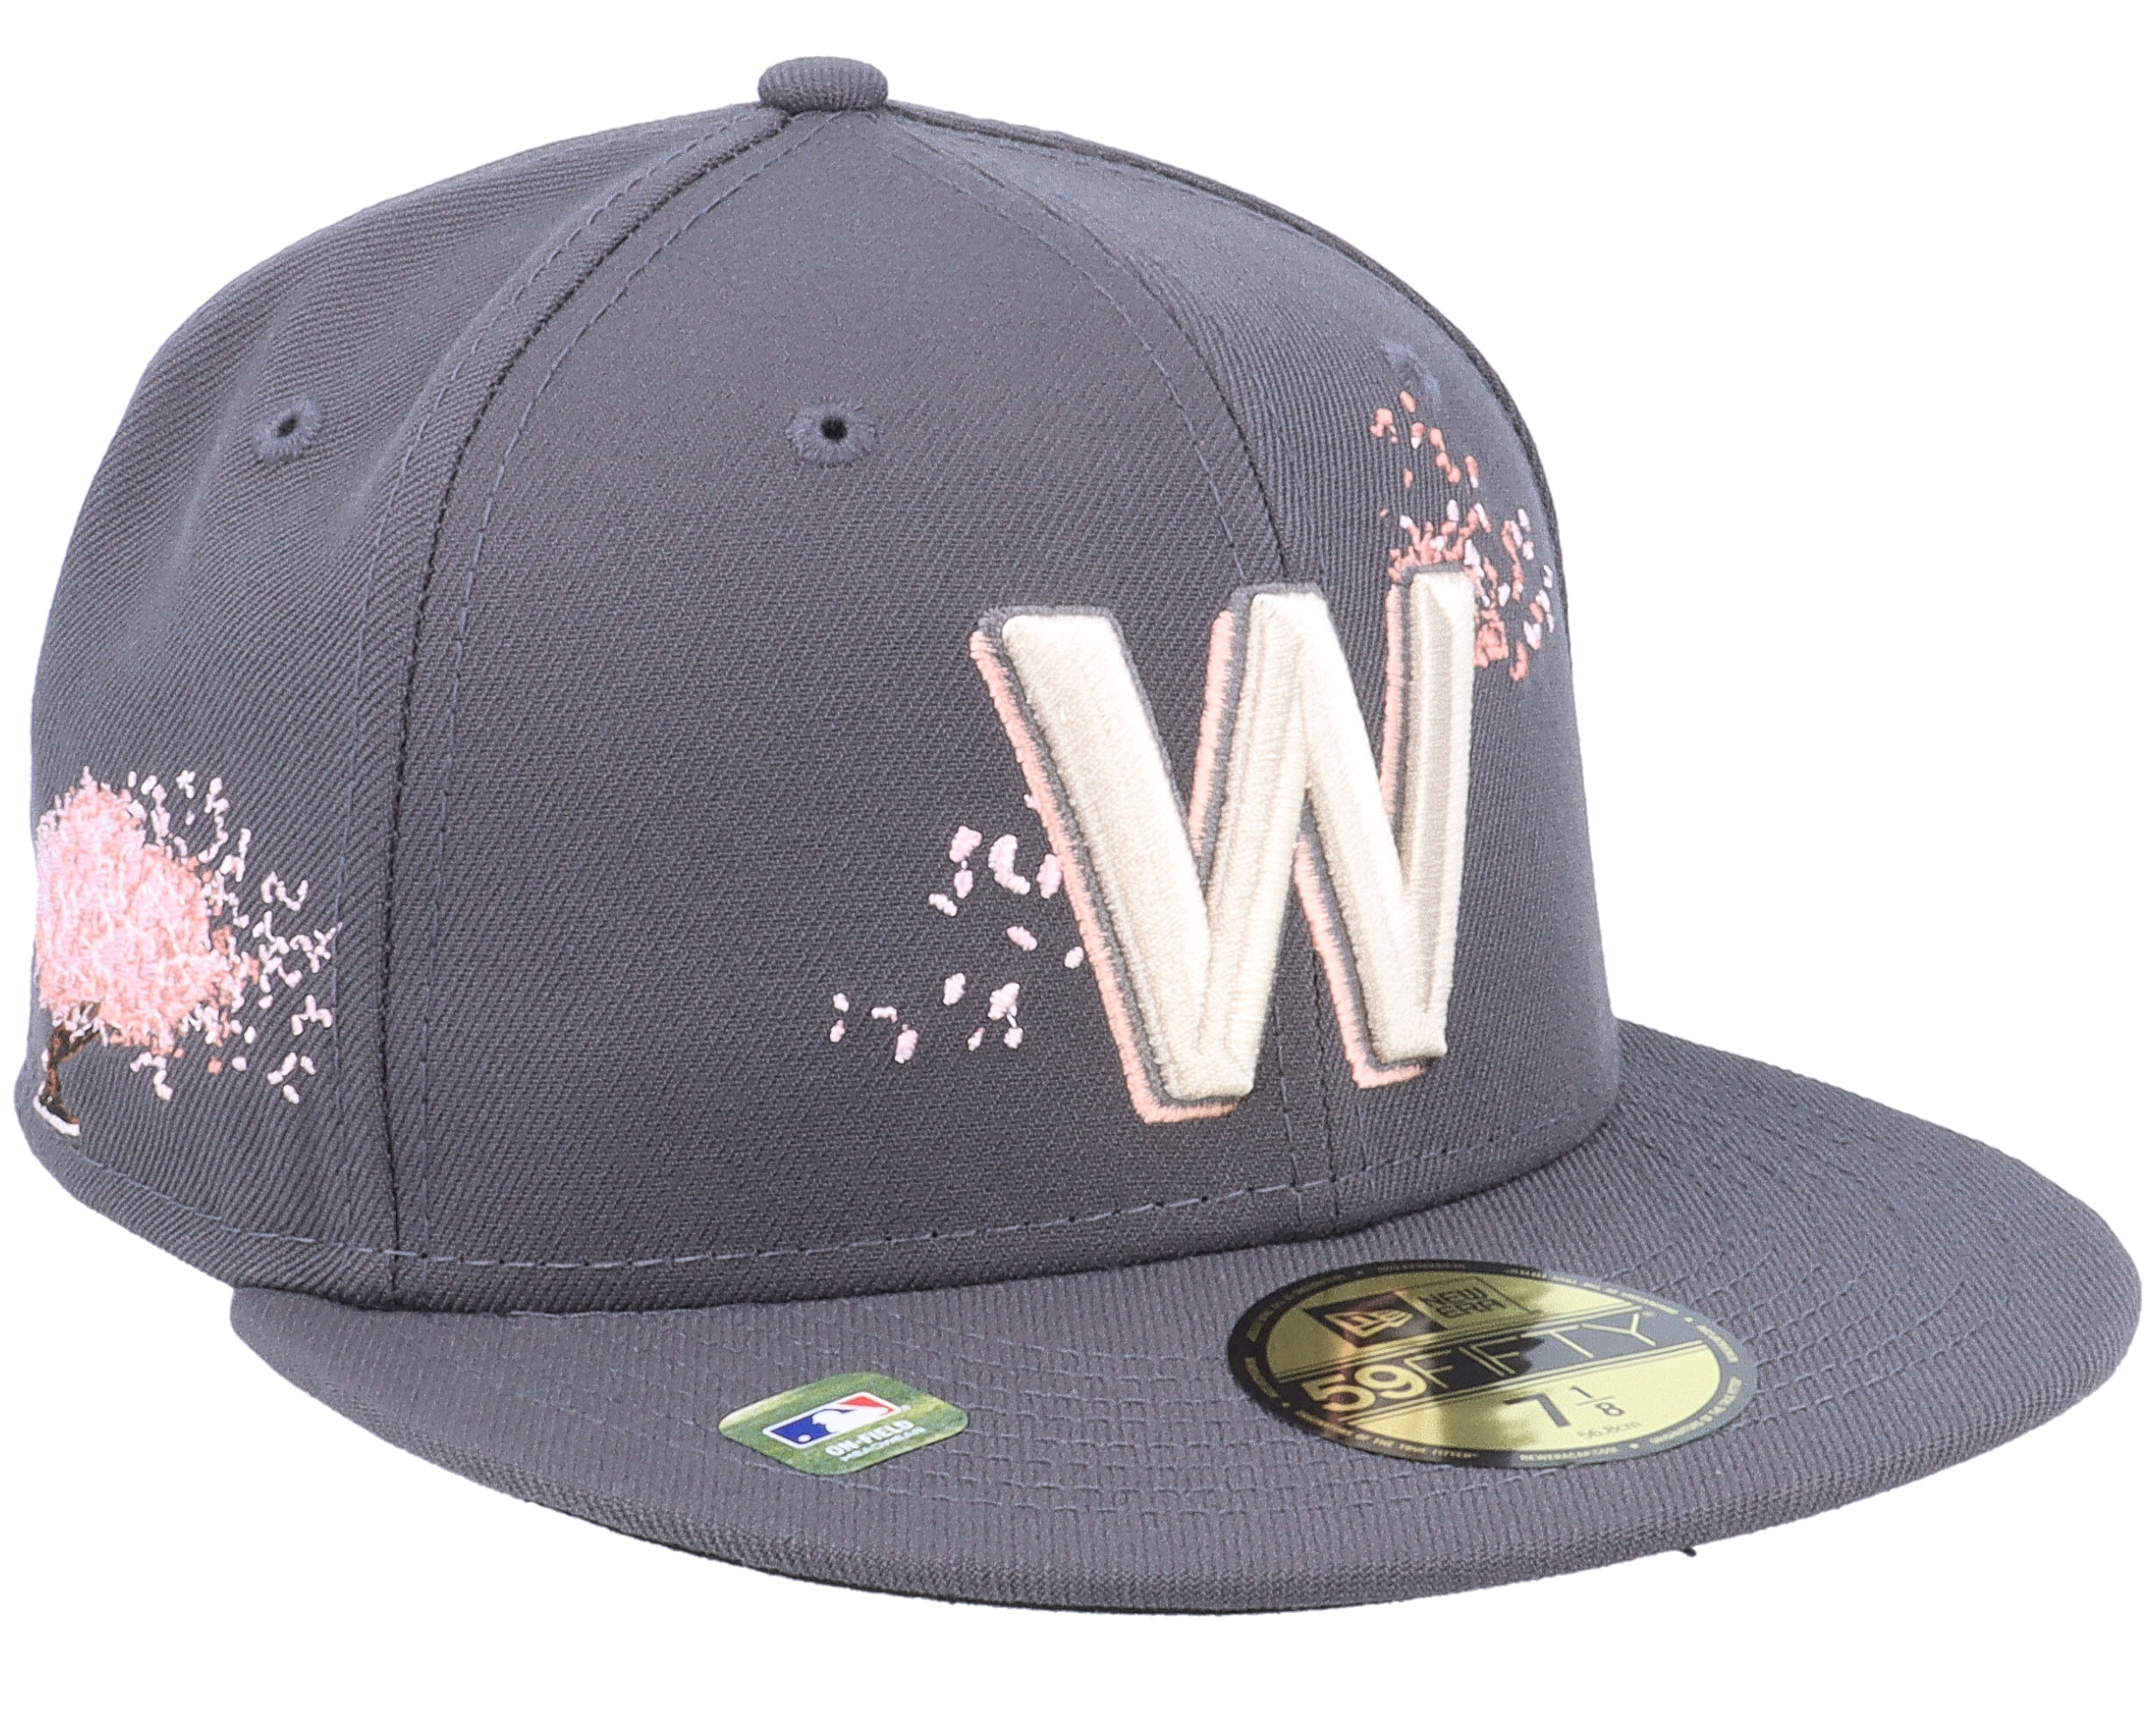 Washington Nationals CITY CONNECT ONFIELD Hat by New Era